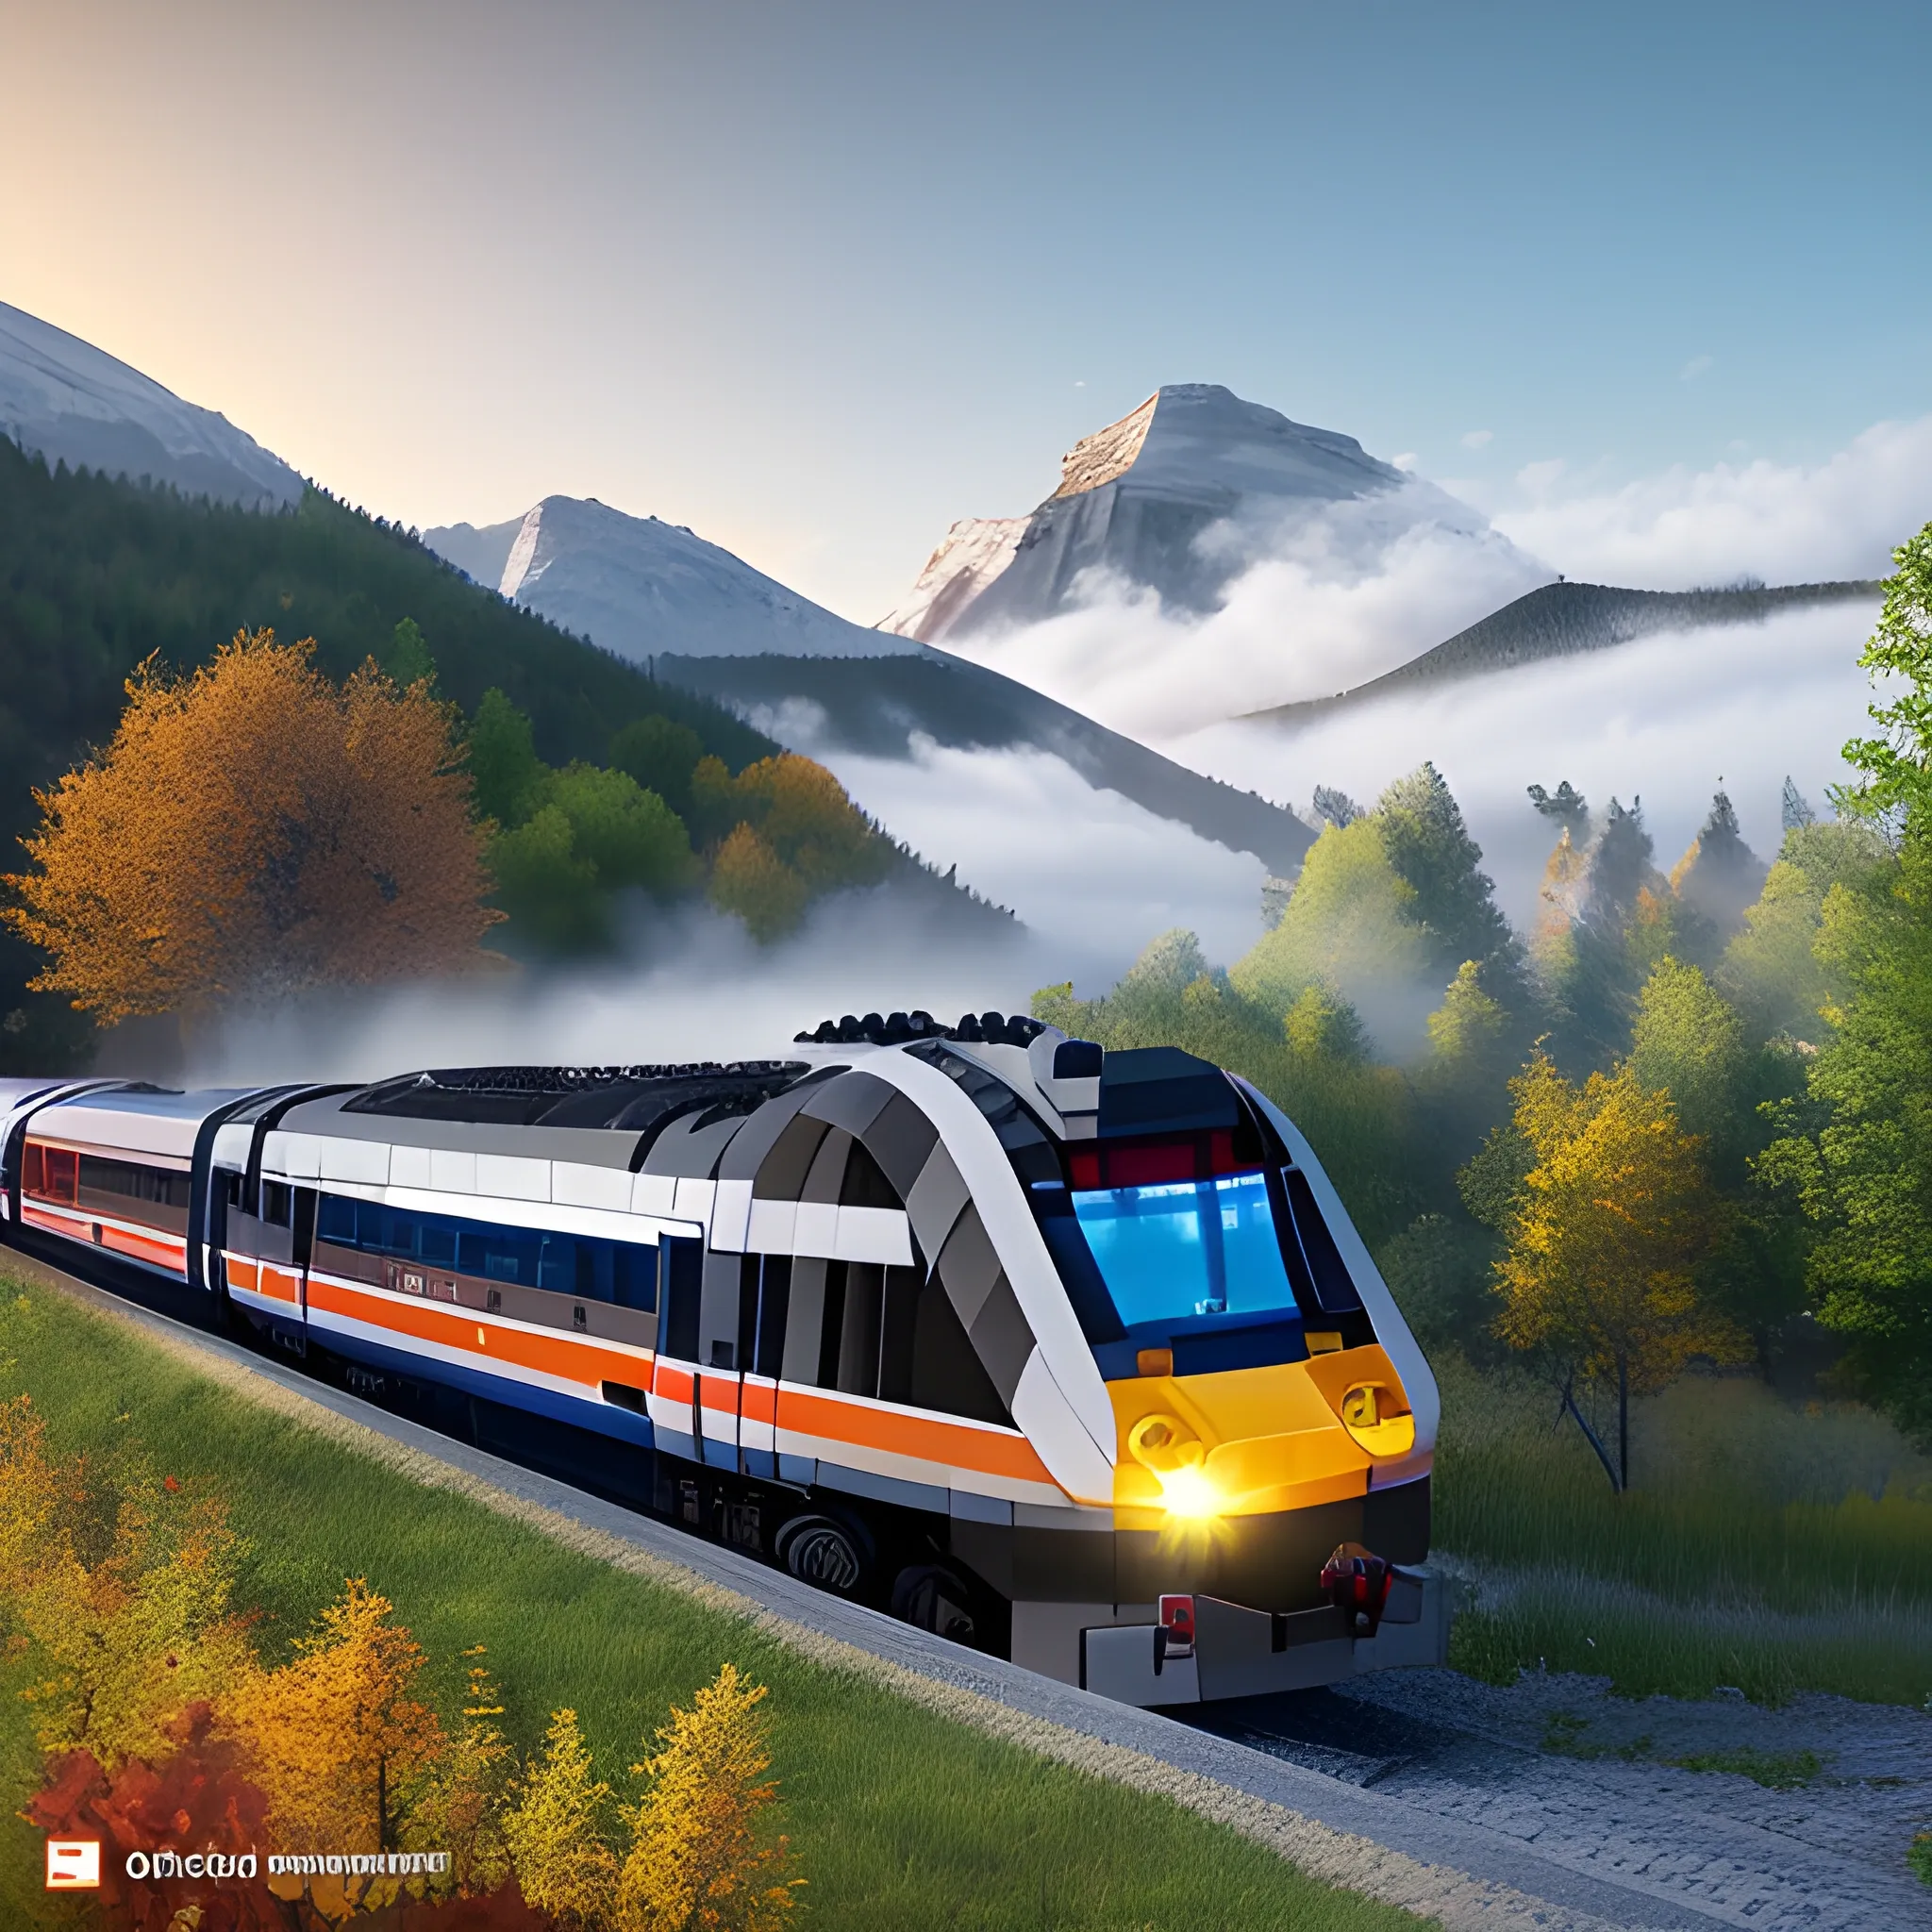 tgv from paris, brand new lego set ( 2 0 2 1 ), retail price 4 5 0, ultra realistic, uhd, 8 ka view from a mountain in Canada, green grass, Indian Summer, leafs falling, fog, warm light, fine details, high definition, realism, sunrise, raytracing, spectacular light, HD, 8k, it starts snowing